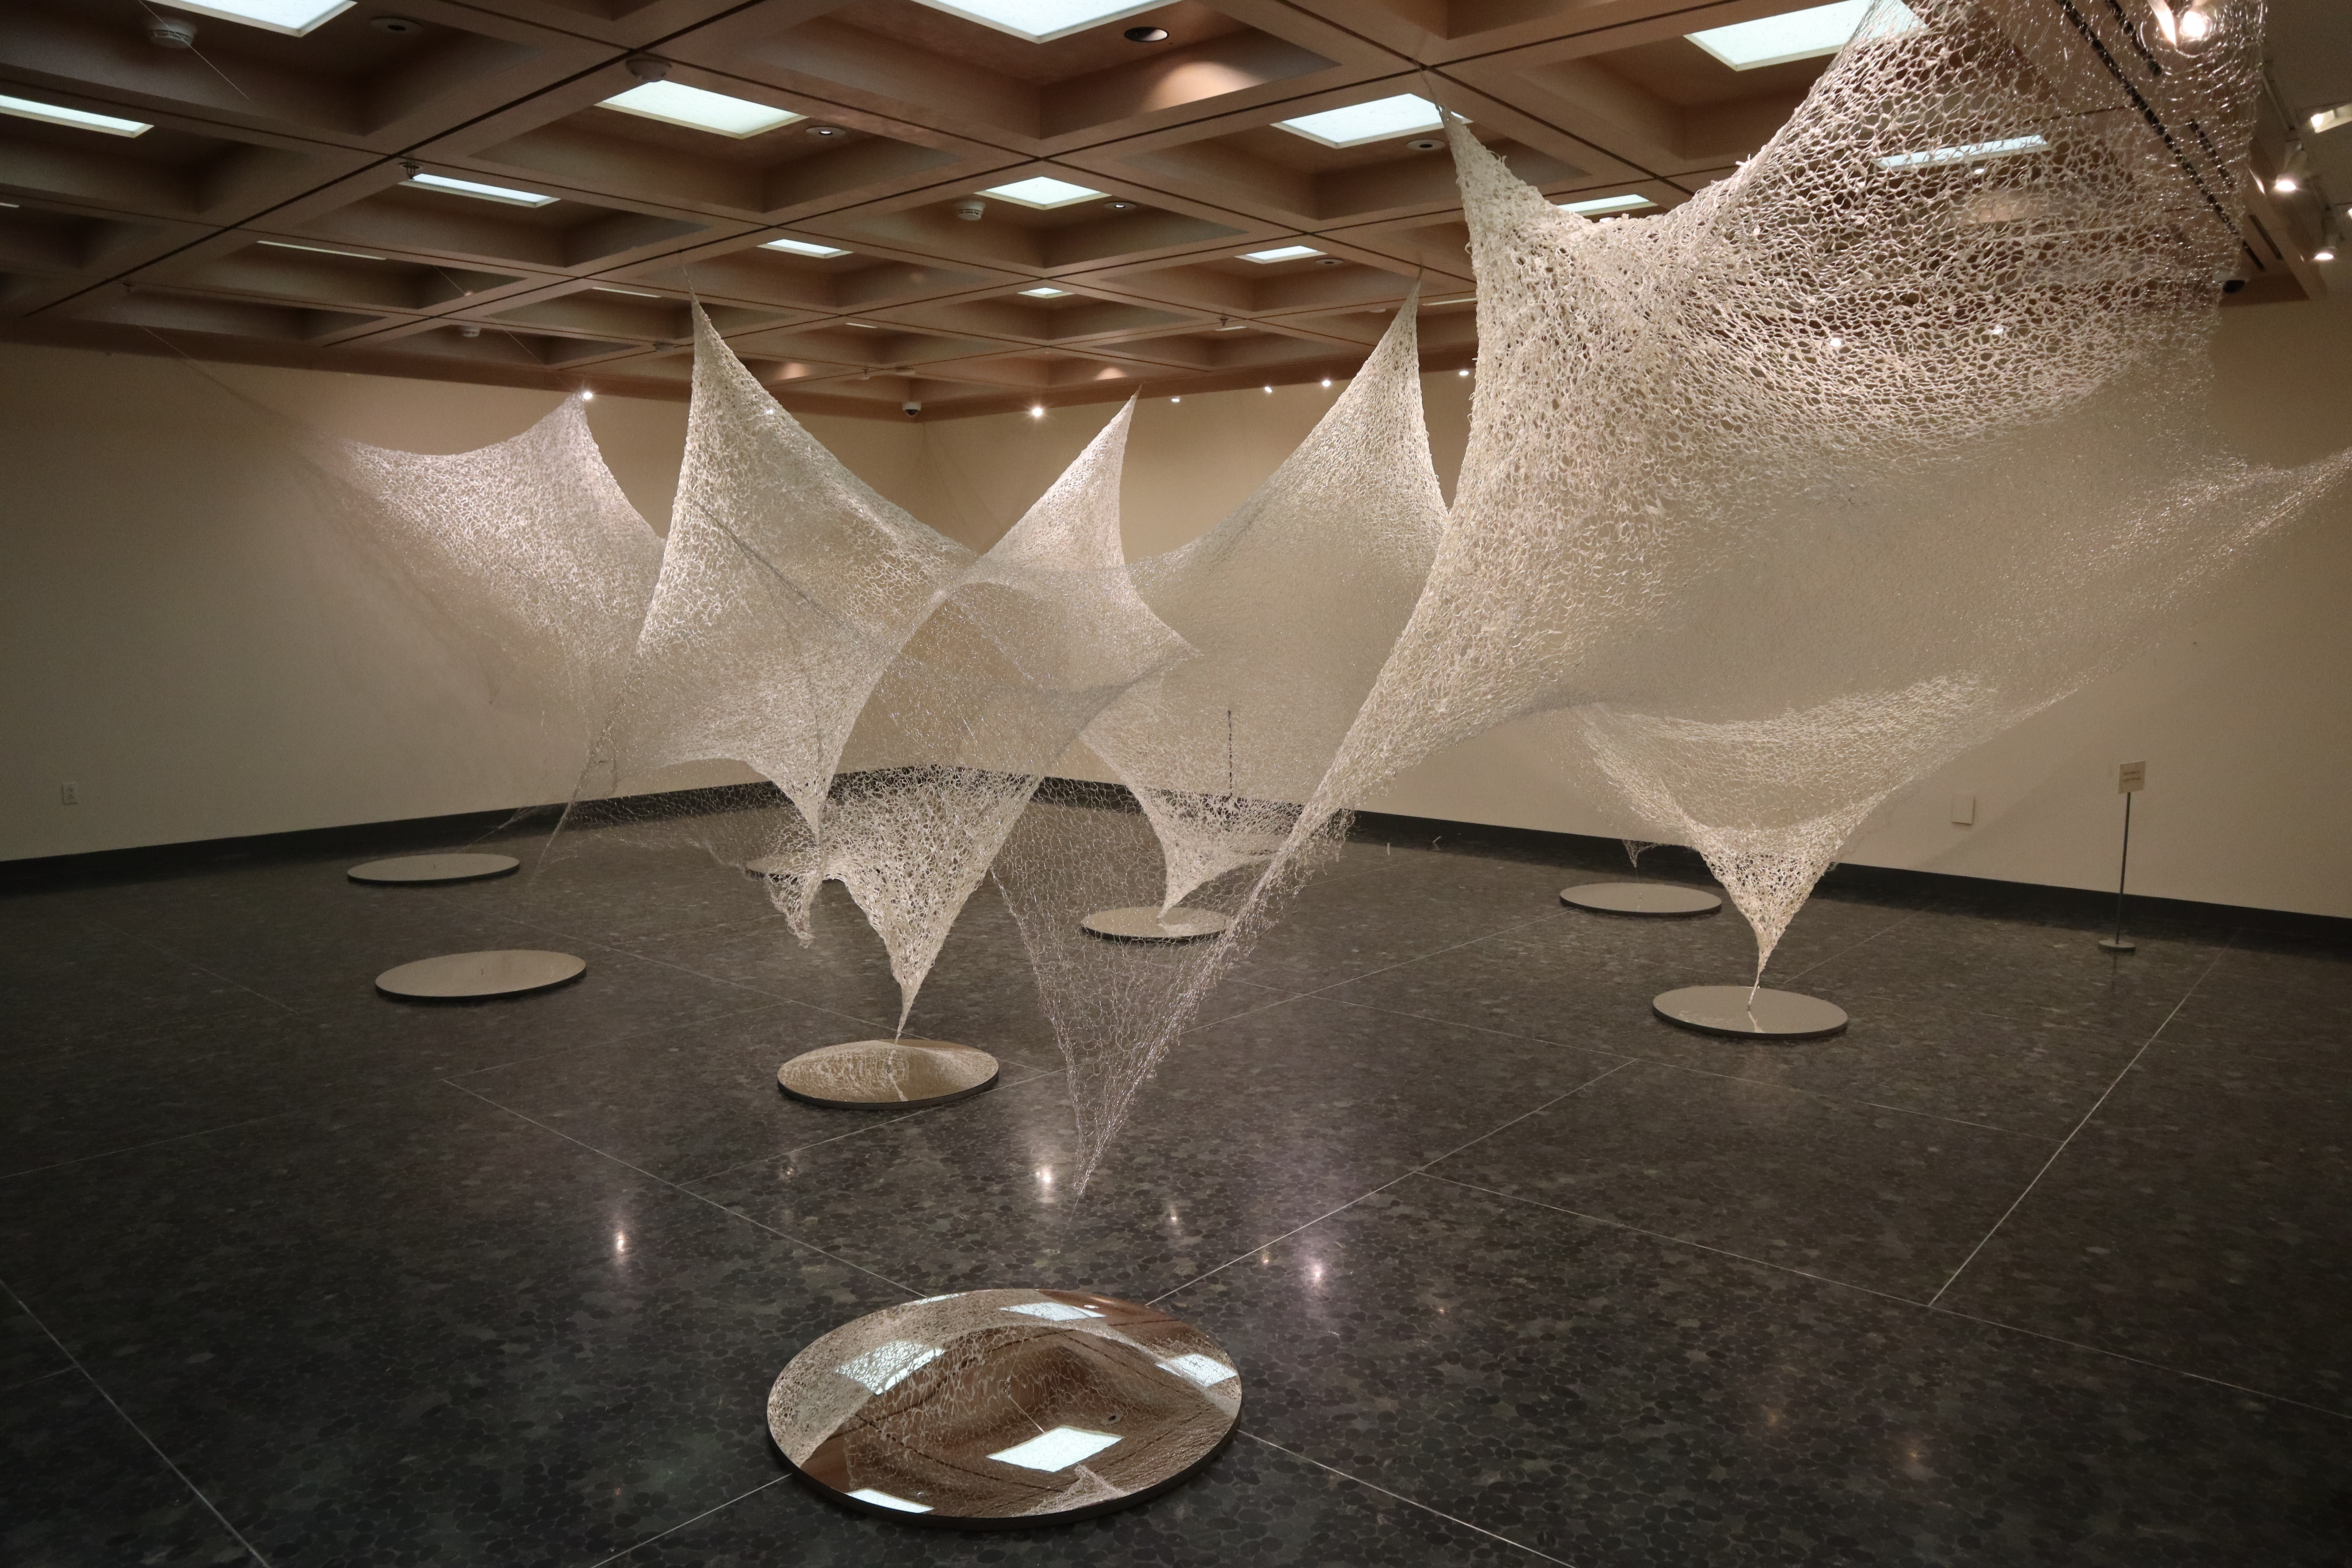 Gallery image with knit fishing lines that look like webs hanging from the ceiling.